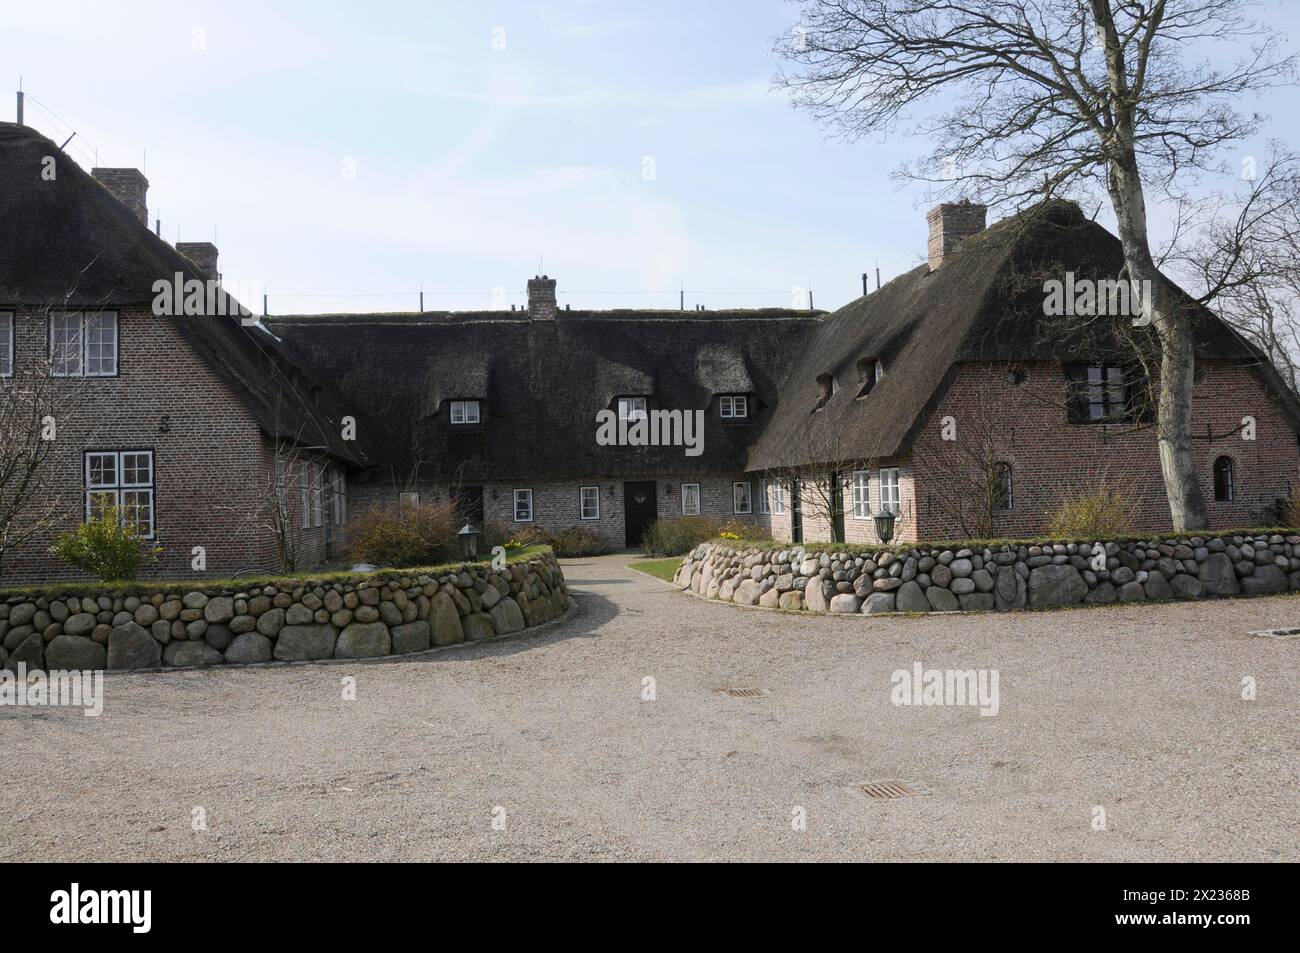 Sylt, North Frisian Island, Schleswig Holstein, Complex of thatched roof houses with stone walls and tree surrounds in spring, Sylt, North Frisian Stock Photo